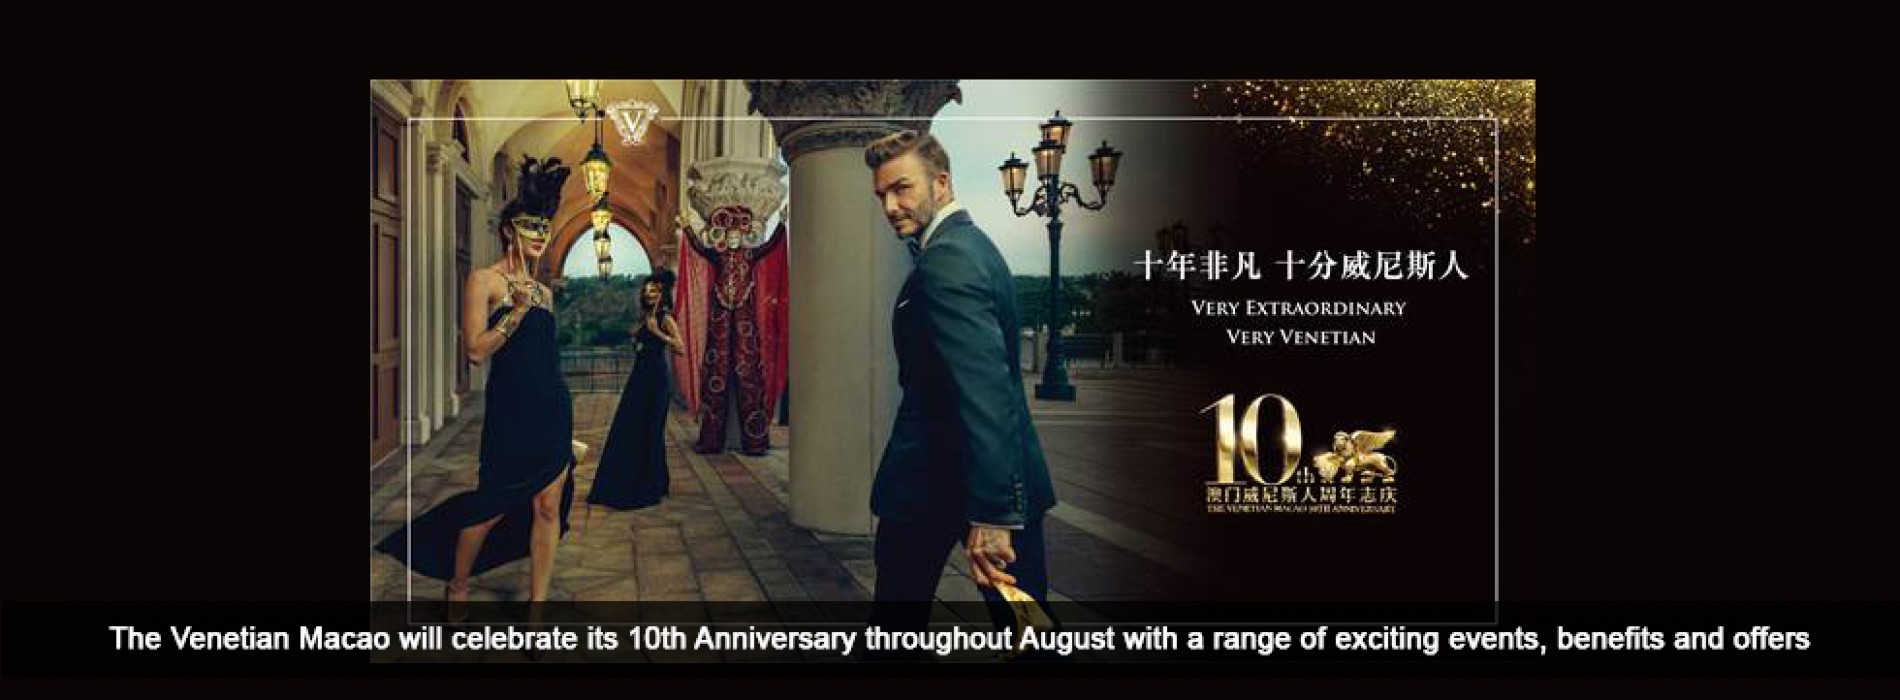 Celebrate The Venetian Macao’s 10th Anniversary this August with Special Offers across the Resort